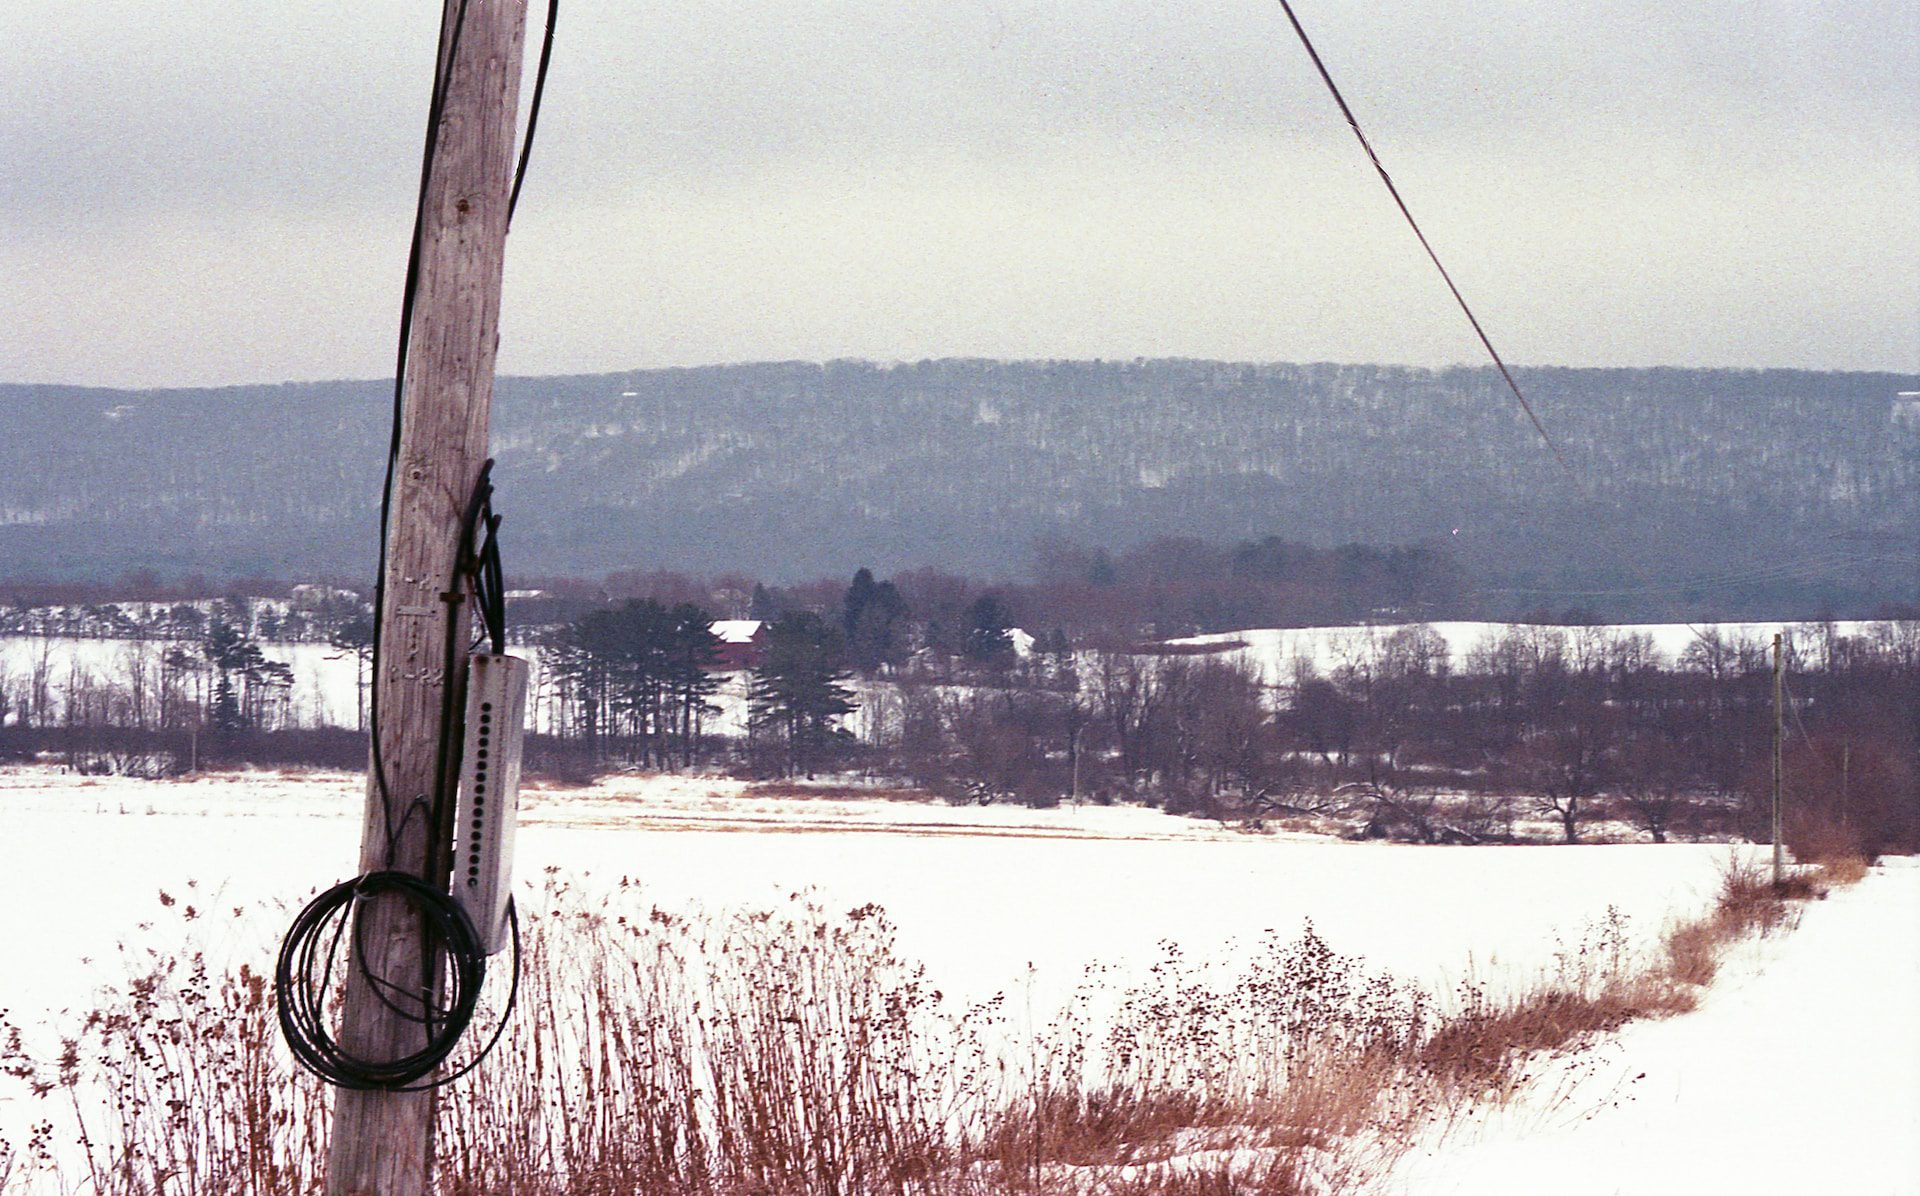 Winter field with mountains in Pennsylvania.